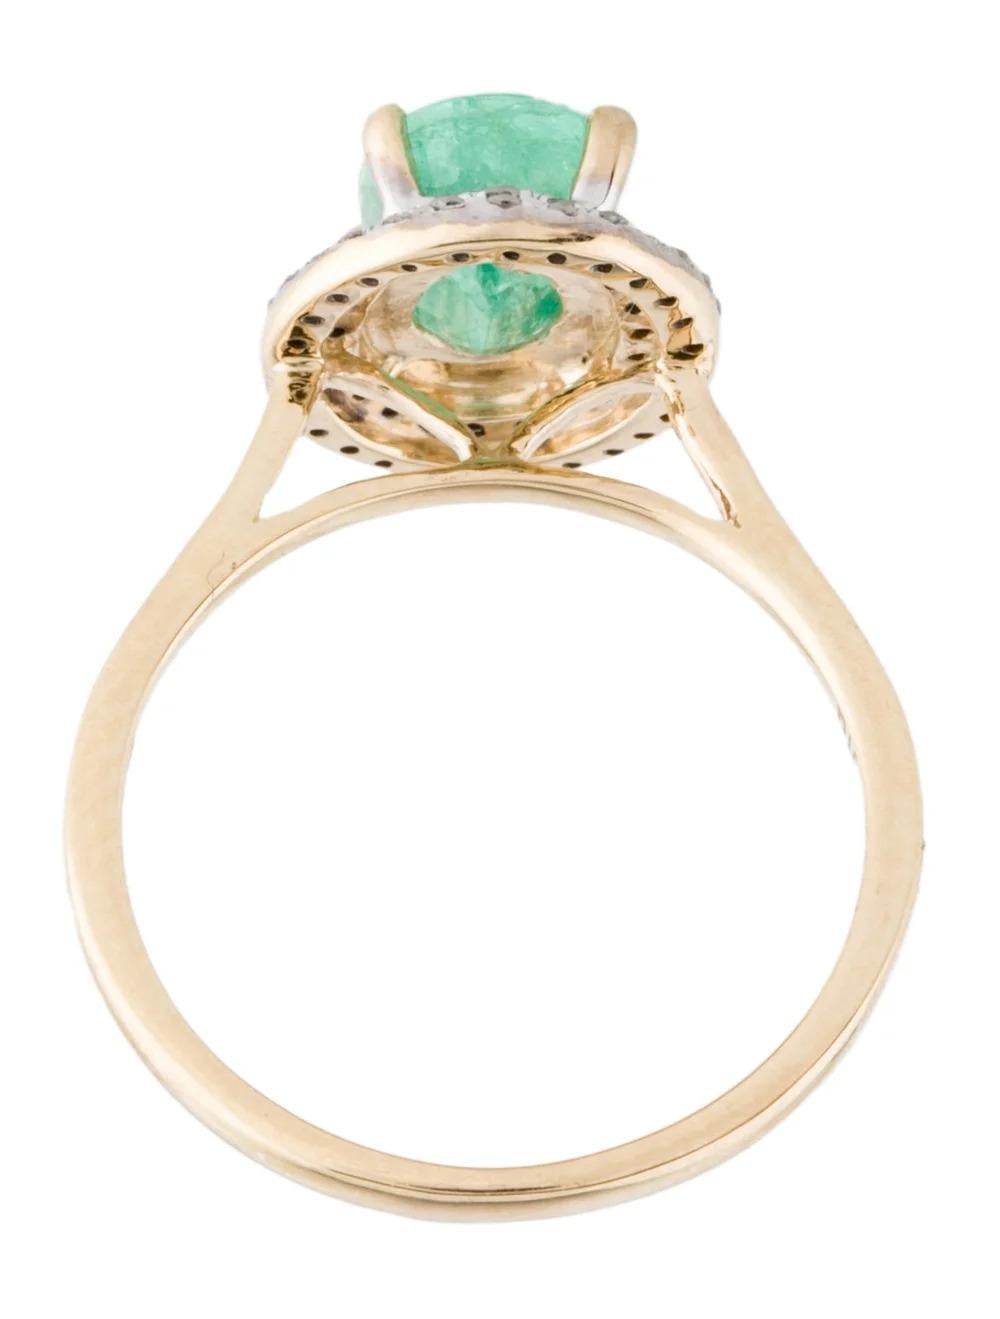 Women's 14K Emerald & Diamond Cocktail Ring 1.51ctw, Size 6.5 - Statement Jewelry For Sale